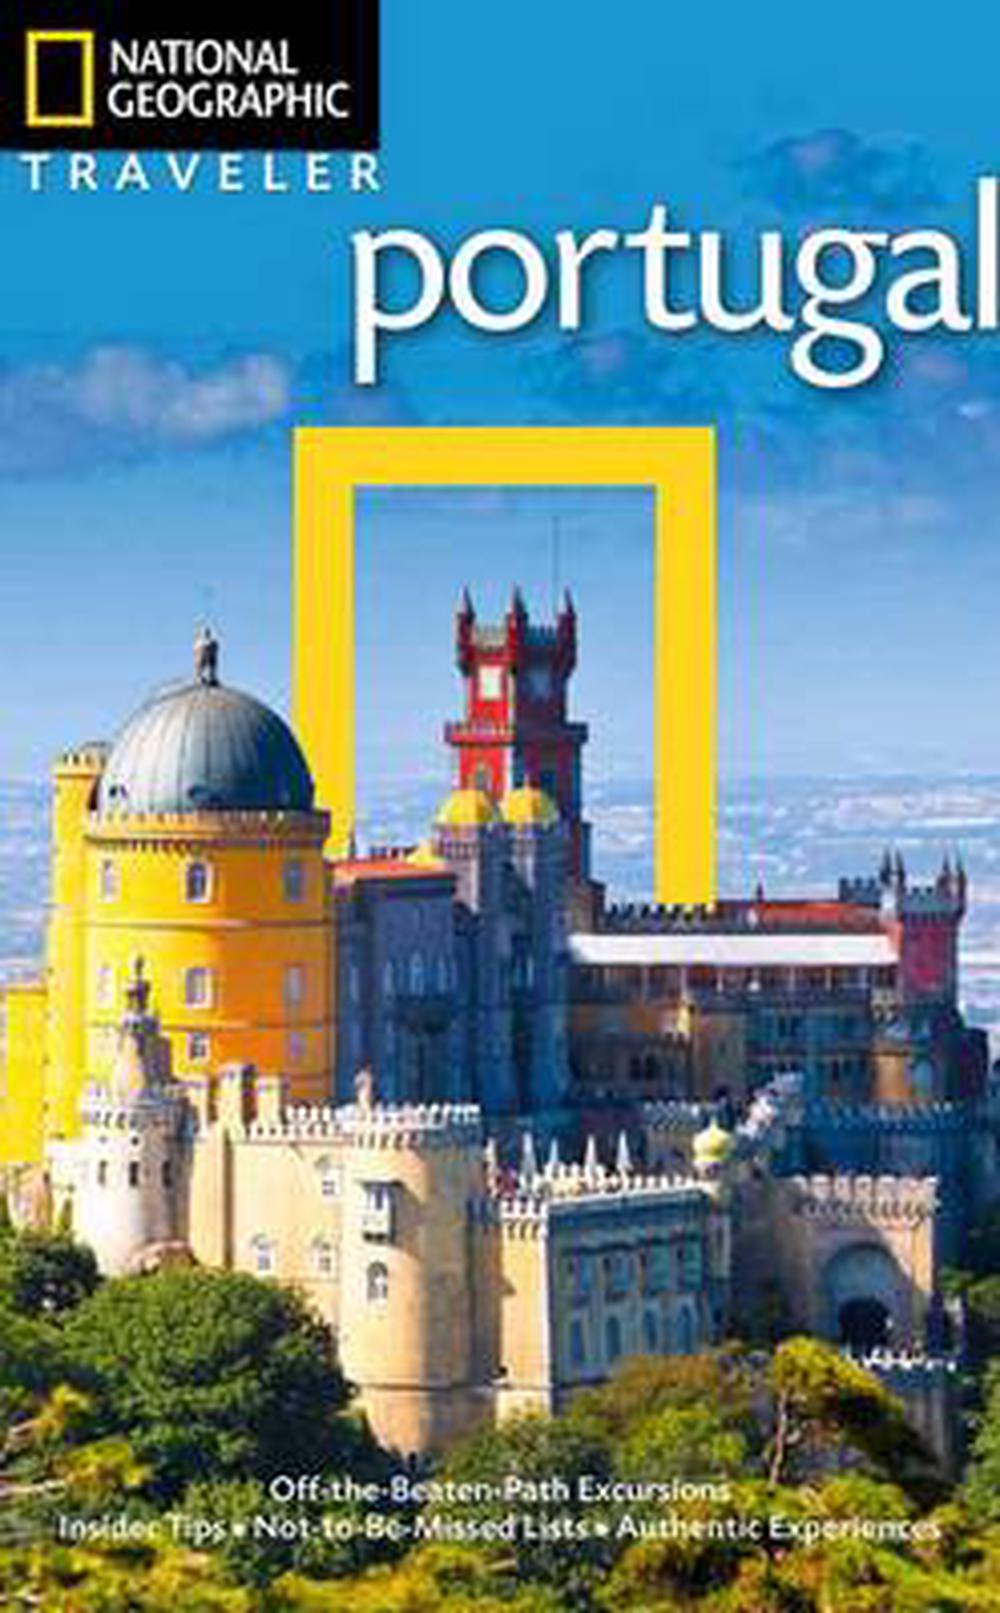 national geographic tour portugal